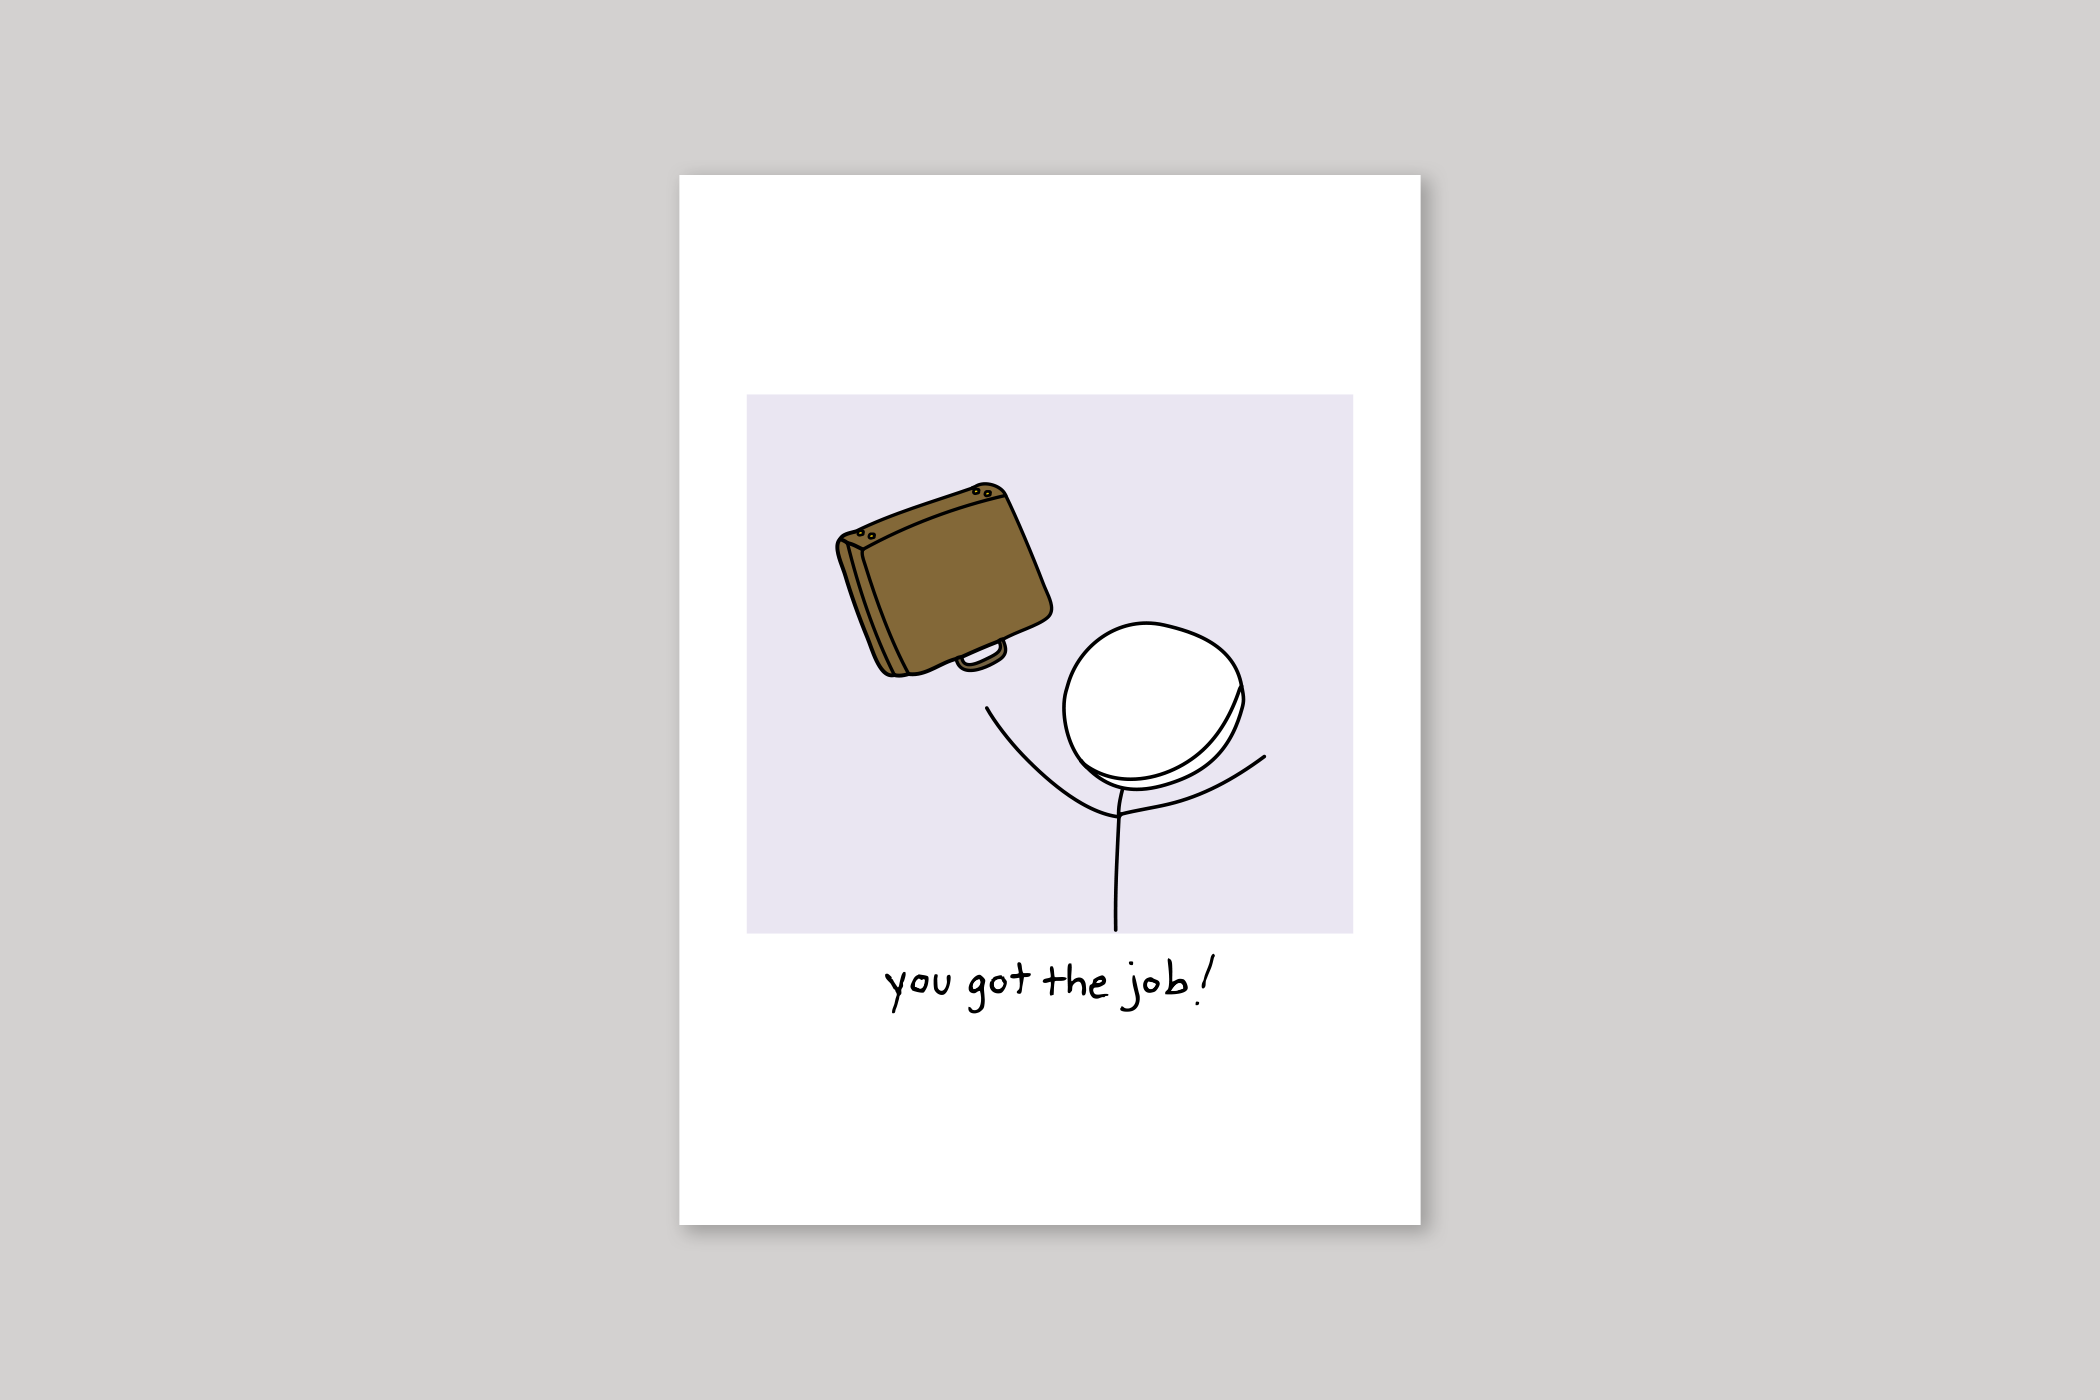 You Got The Job! new job card humorous illustration from Mean Cards range of greeting cards by Icon.